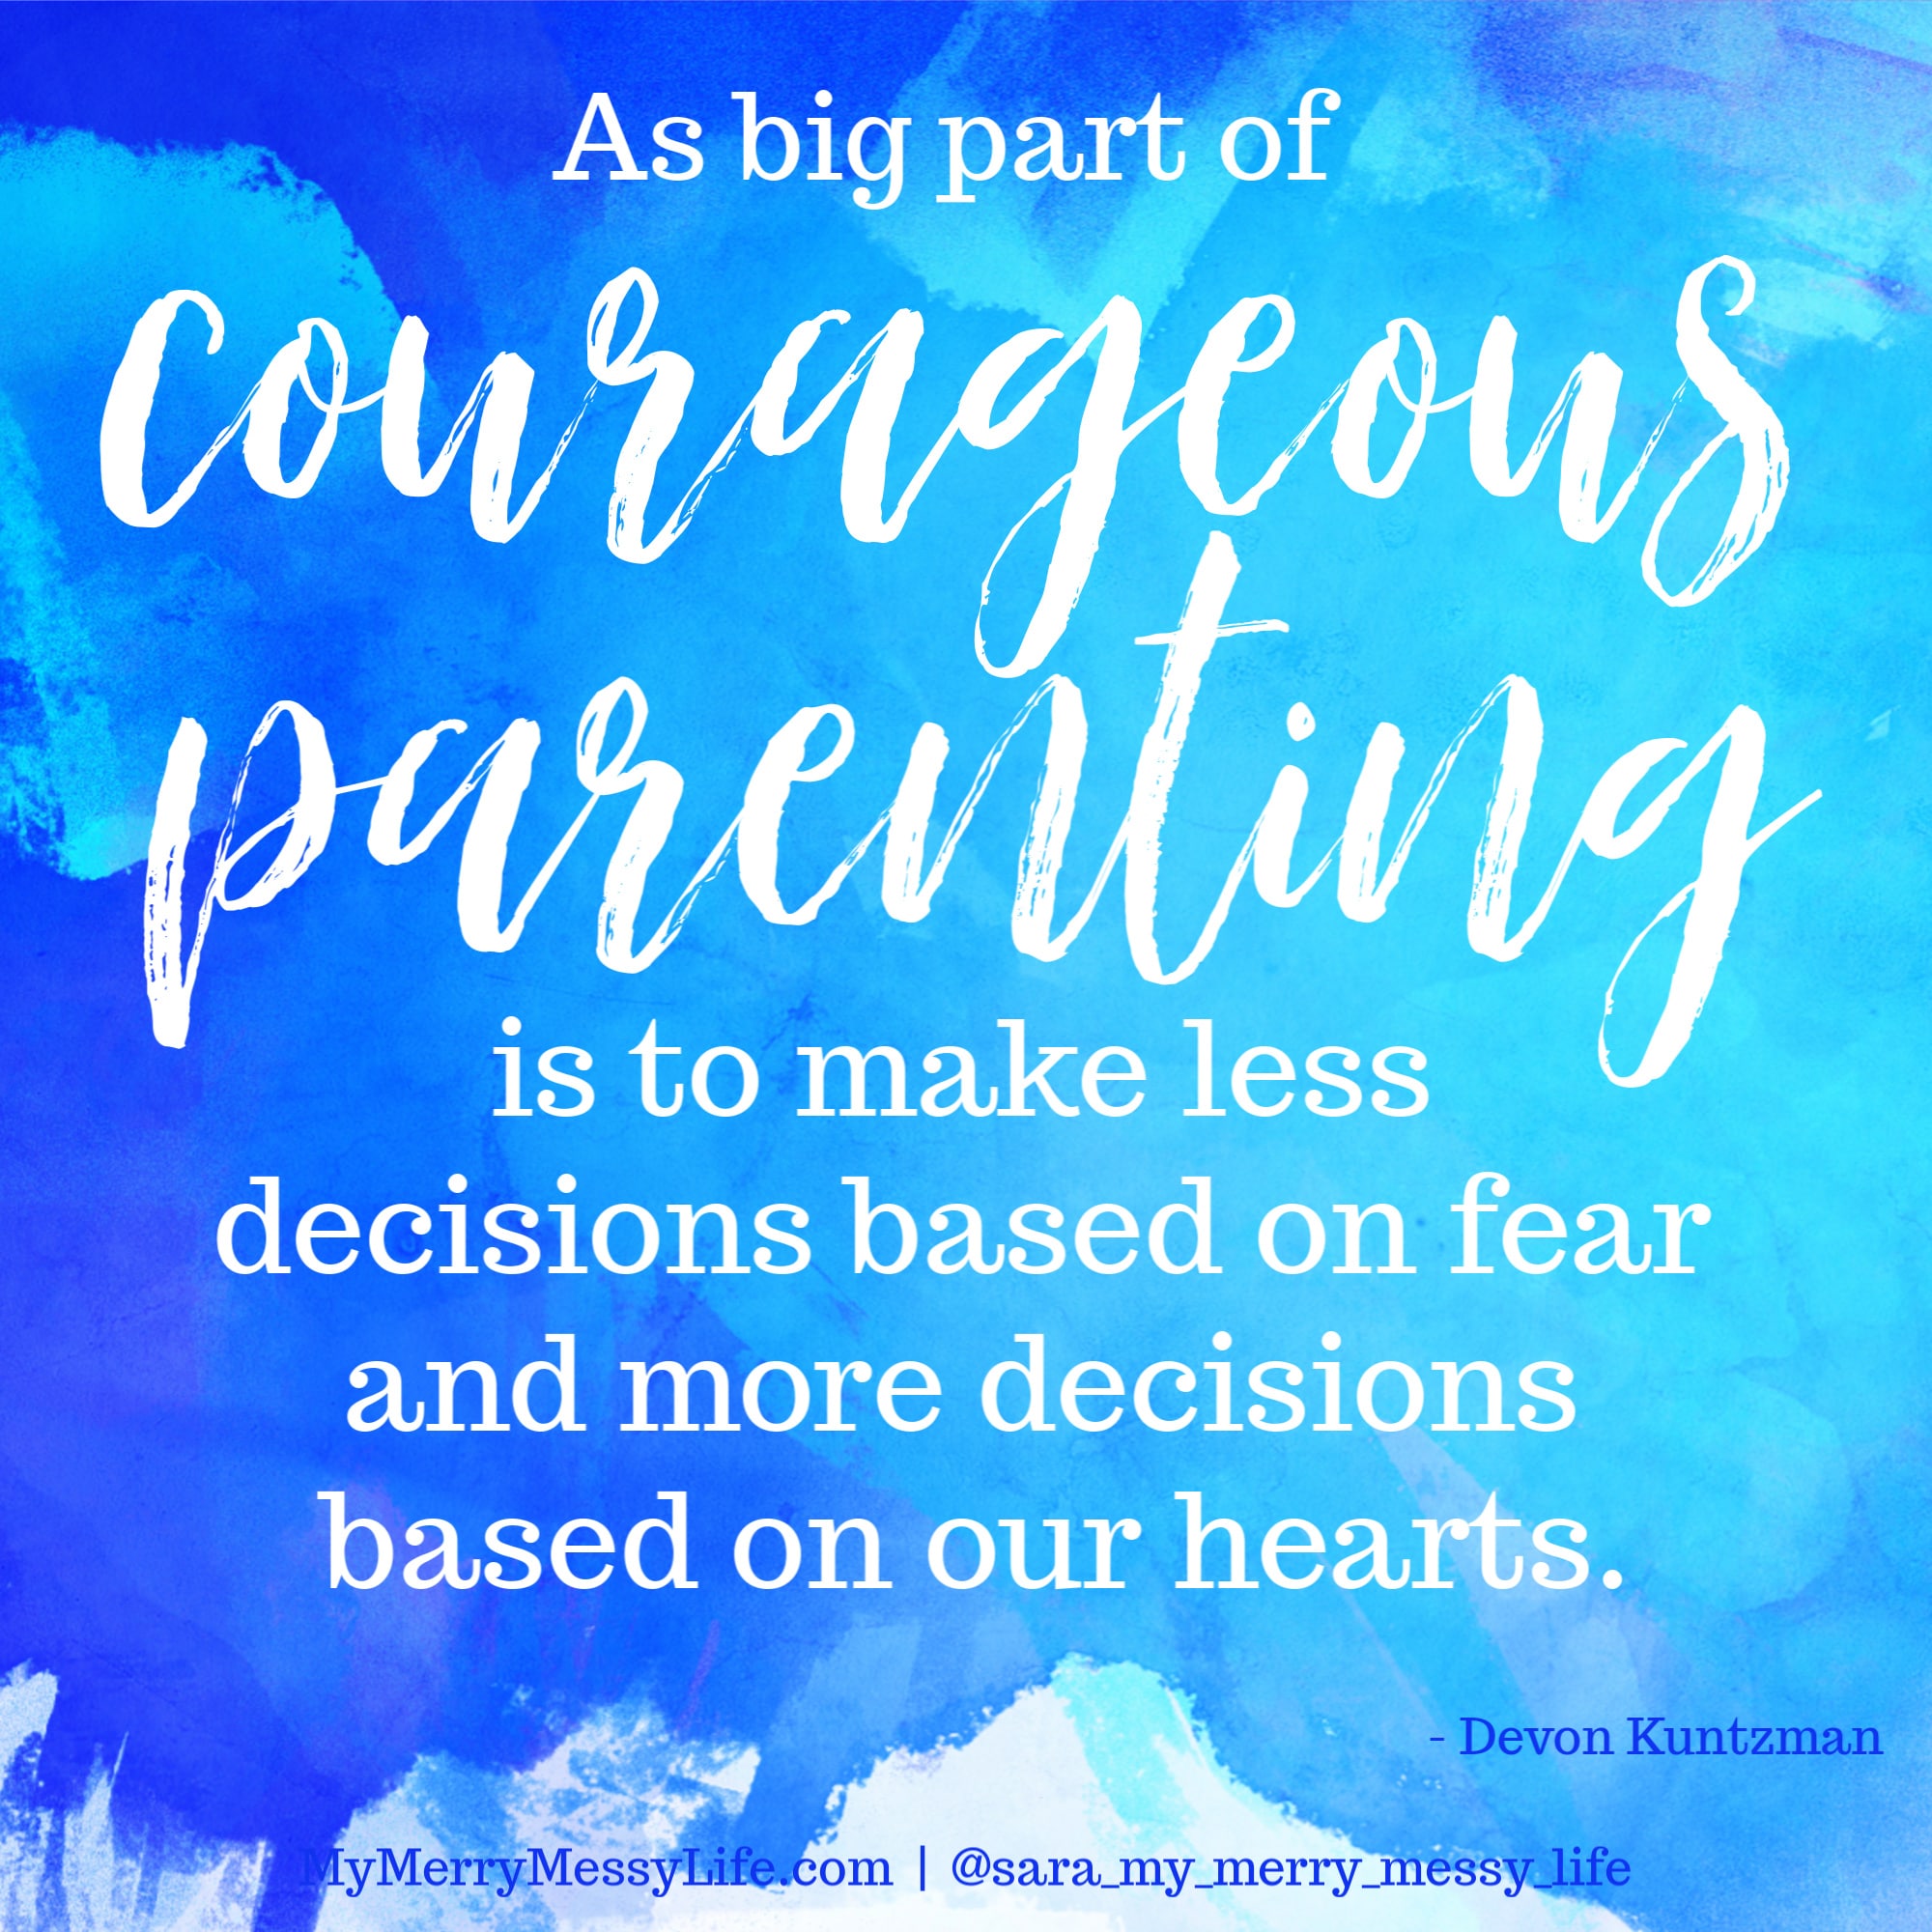 A big part of courageous parenting is to make less decisions based on fear and more decisions based on our hearts. - Devon Kuntzman on episode #19 of The Merry Messy Moms Show podcast